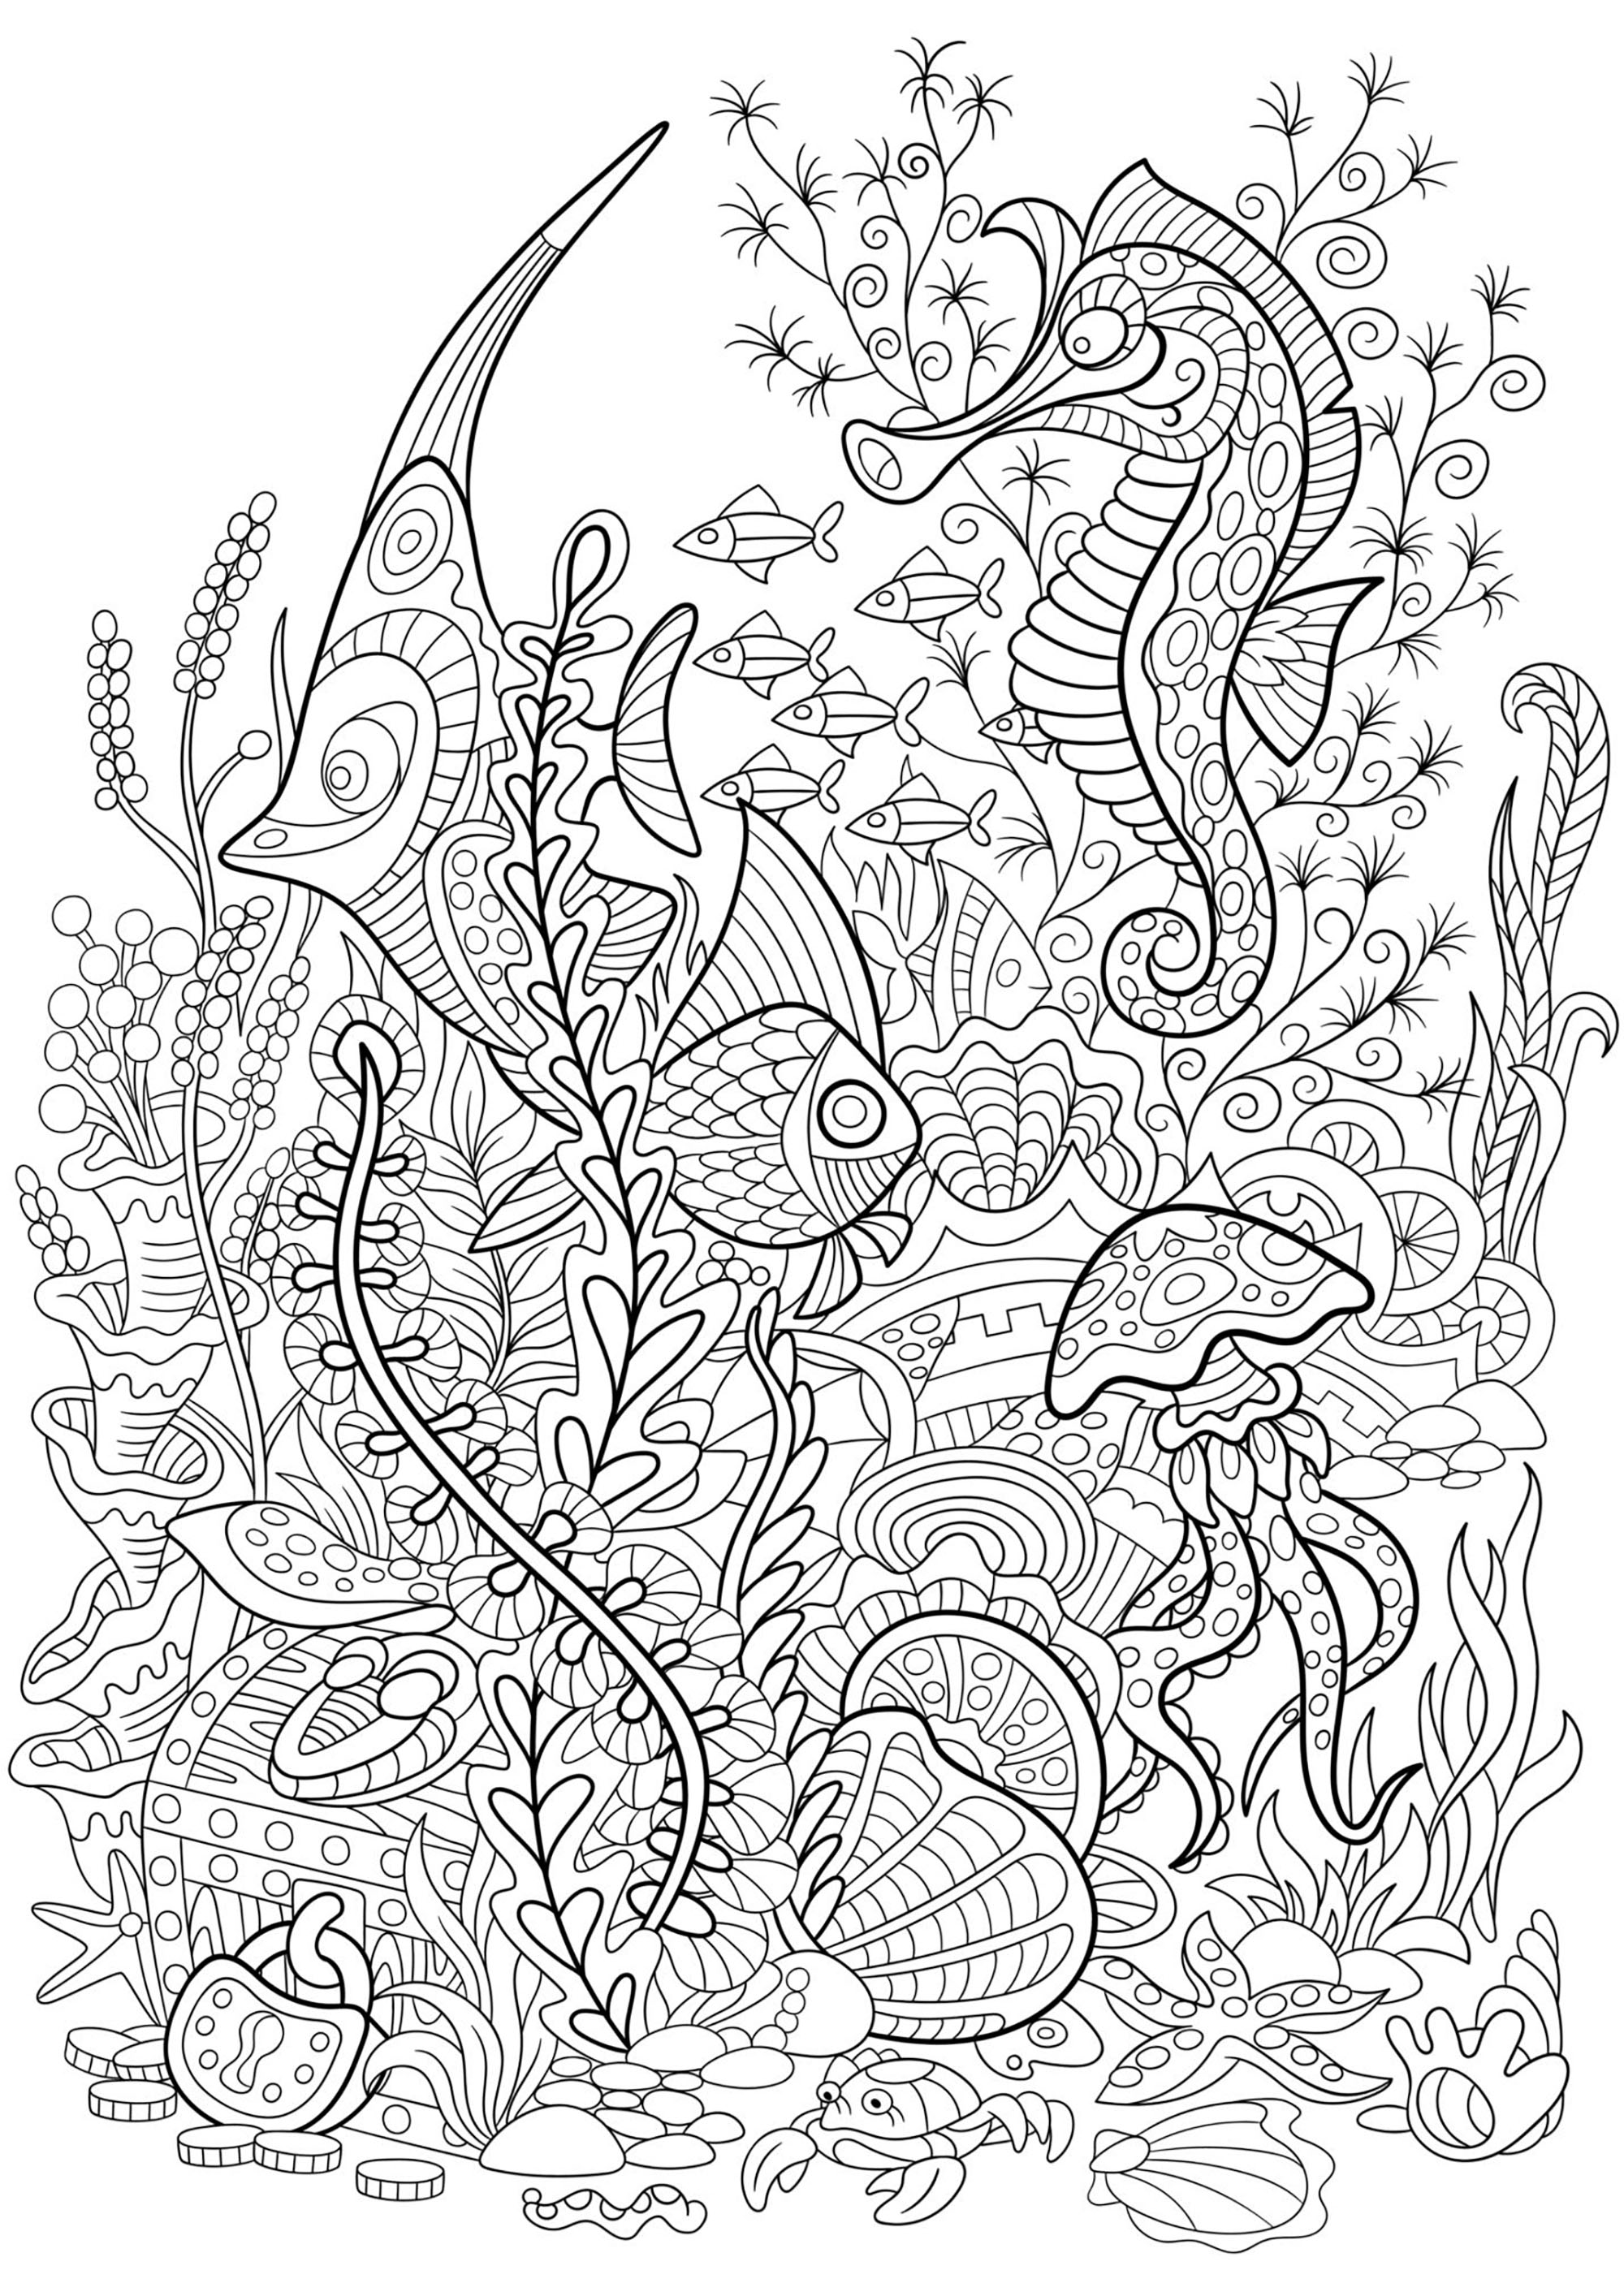 free-under-the-sea-coloring-pages-to-print-for-kids